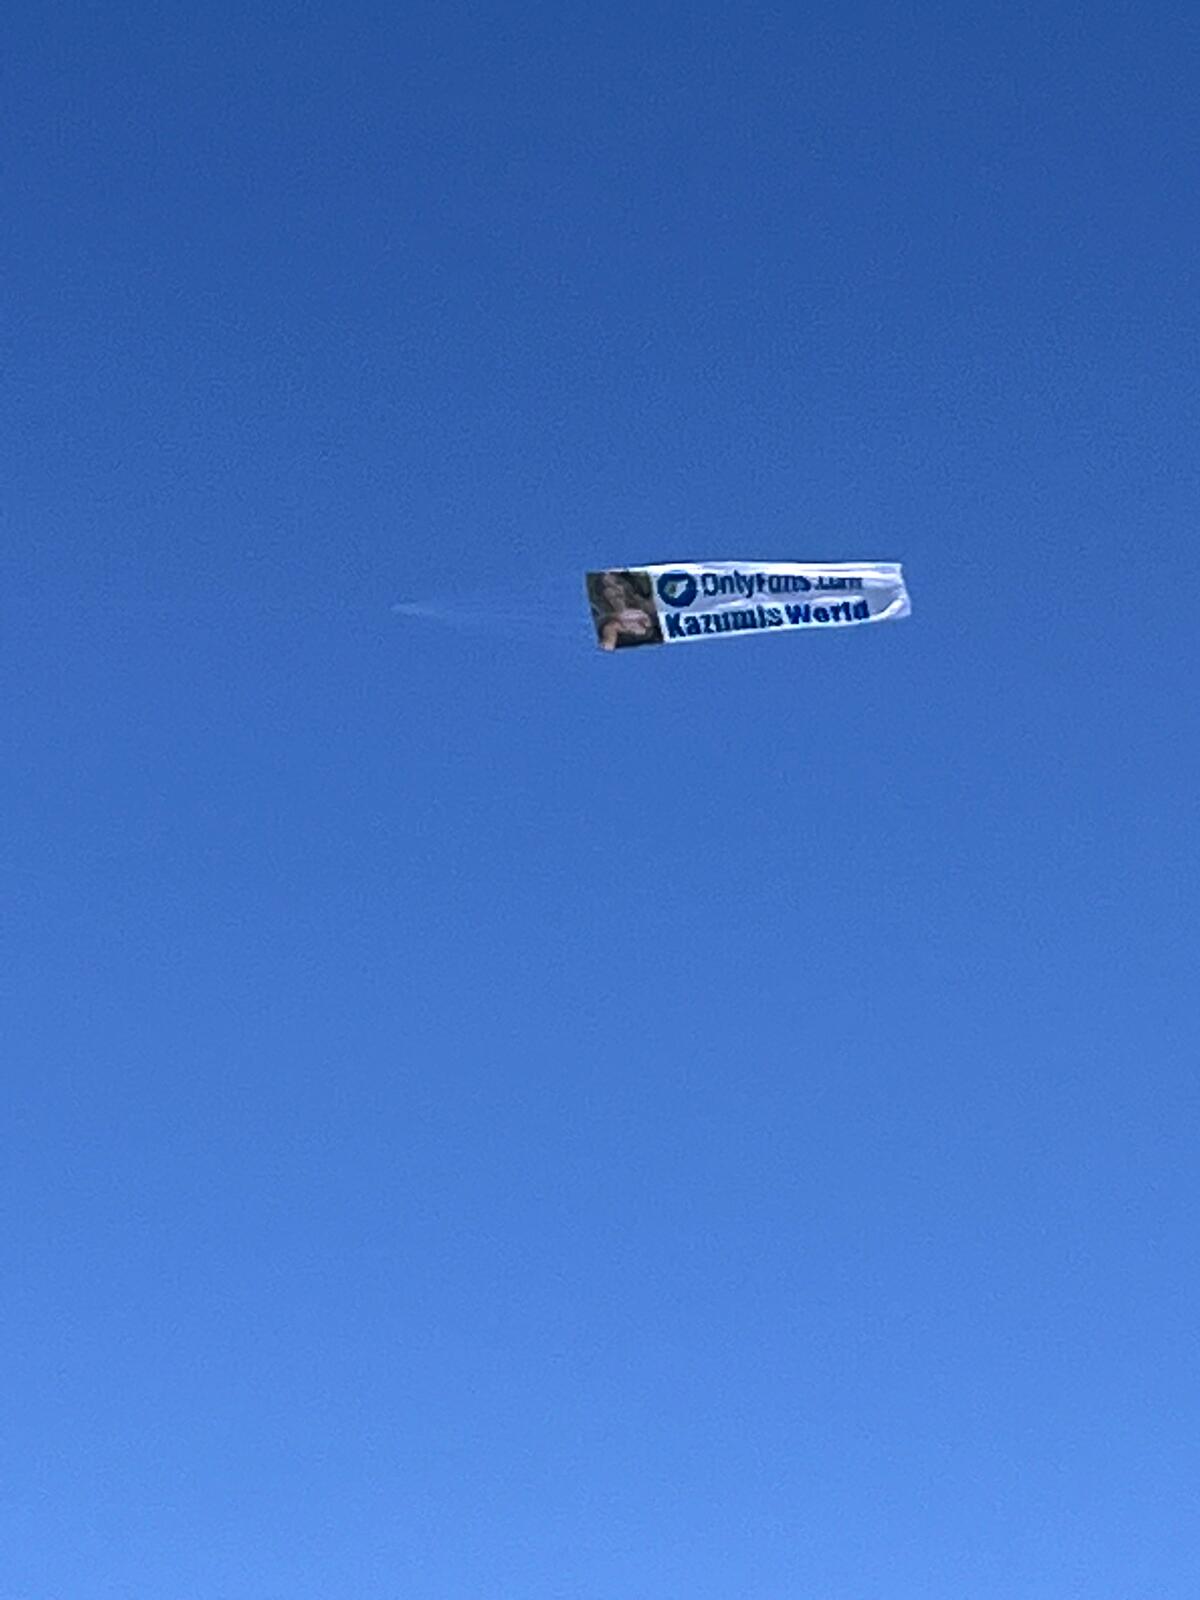 An airplane flying a banner